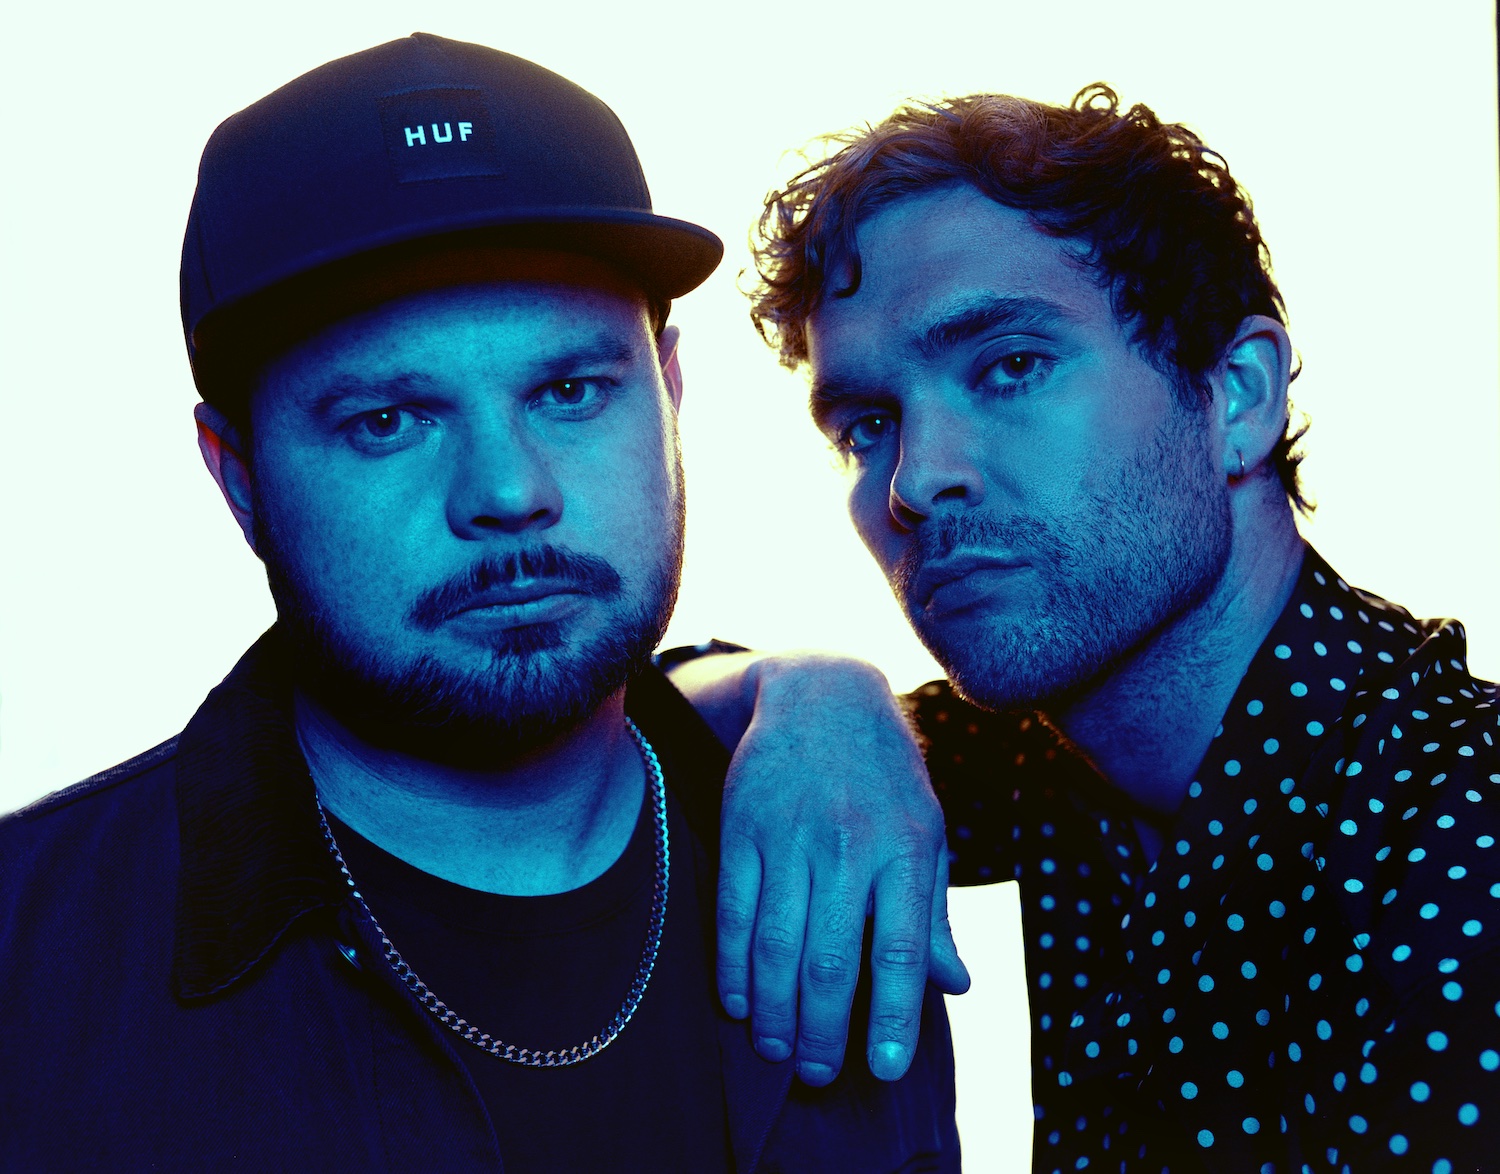 ROYAL BLOOD SHARE NEW SINGLE ‘PULL ME THROUGH’ | NEW ALBUM BACK TO THE WATER BELOW DUE OUT SEPTEMBER 1